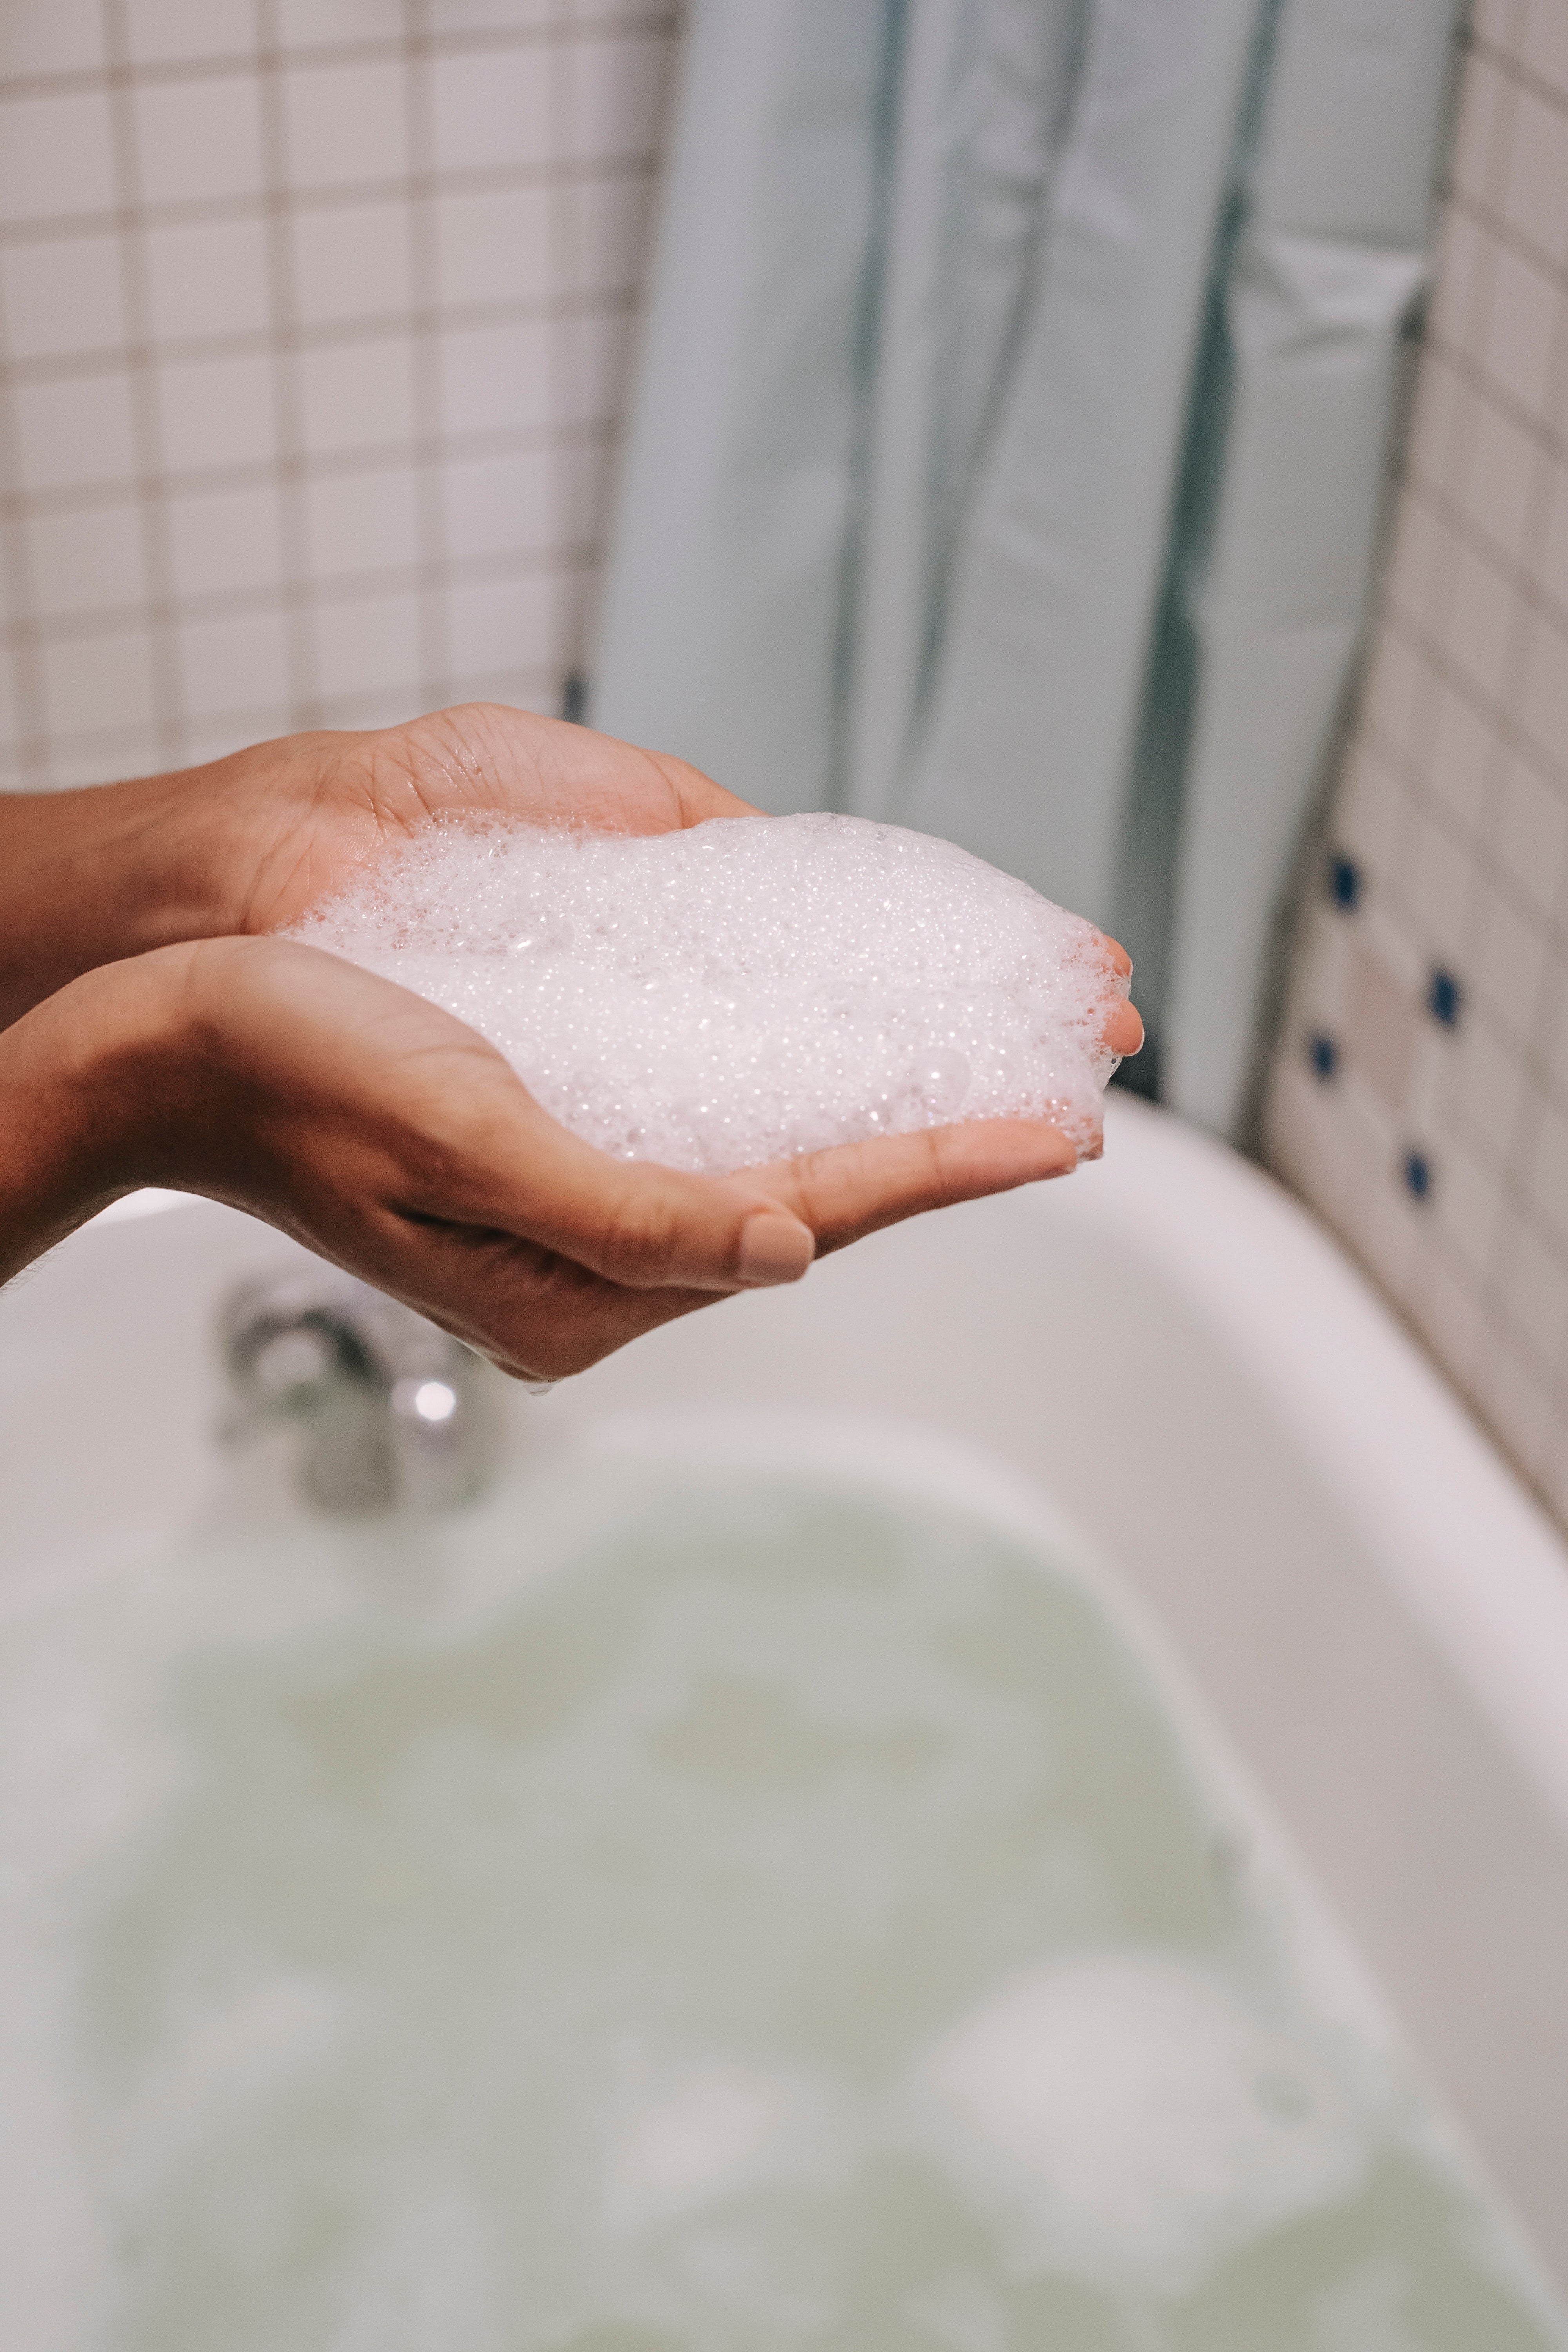 Can Bubble Baths Cause Yeast Infections?